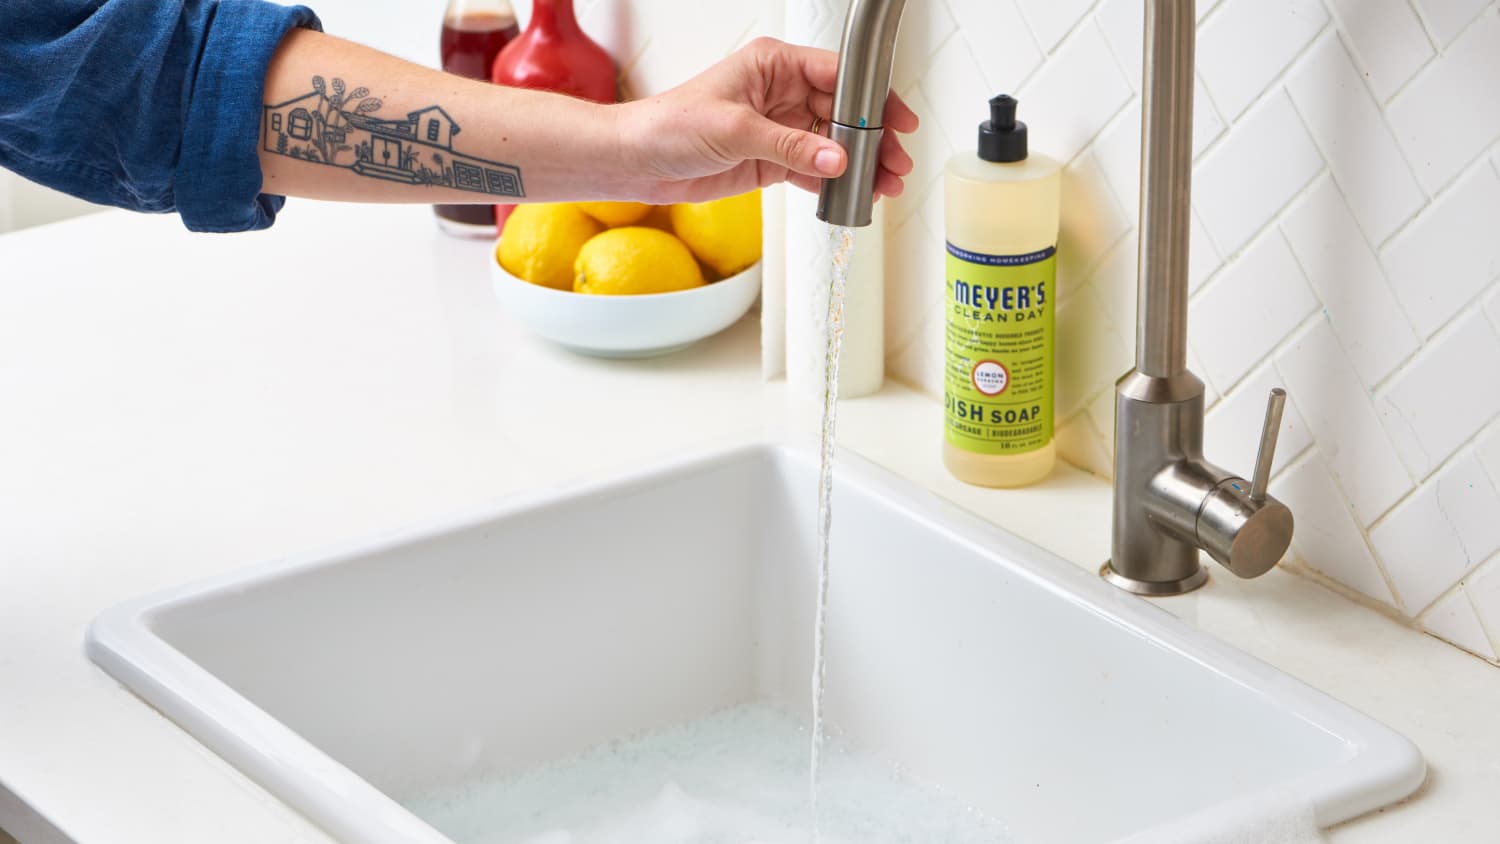 TikToker shares easy way to clean your faucet